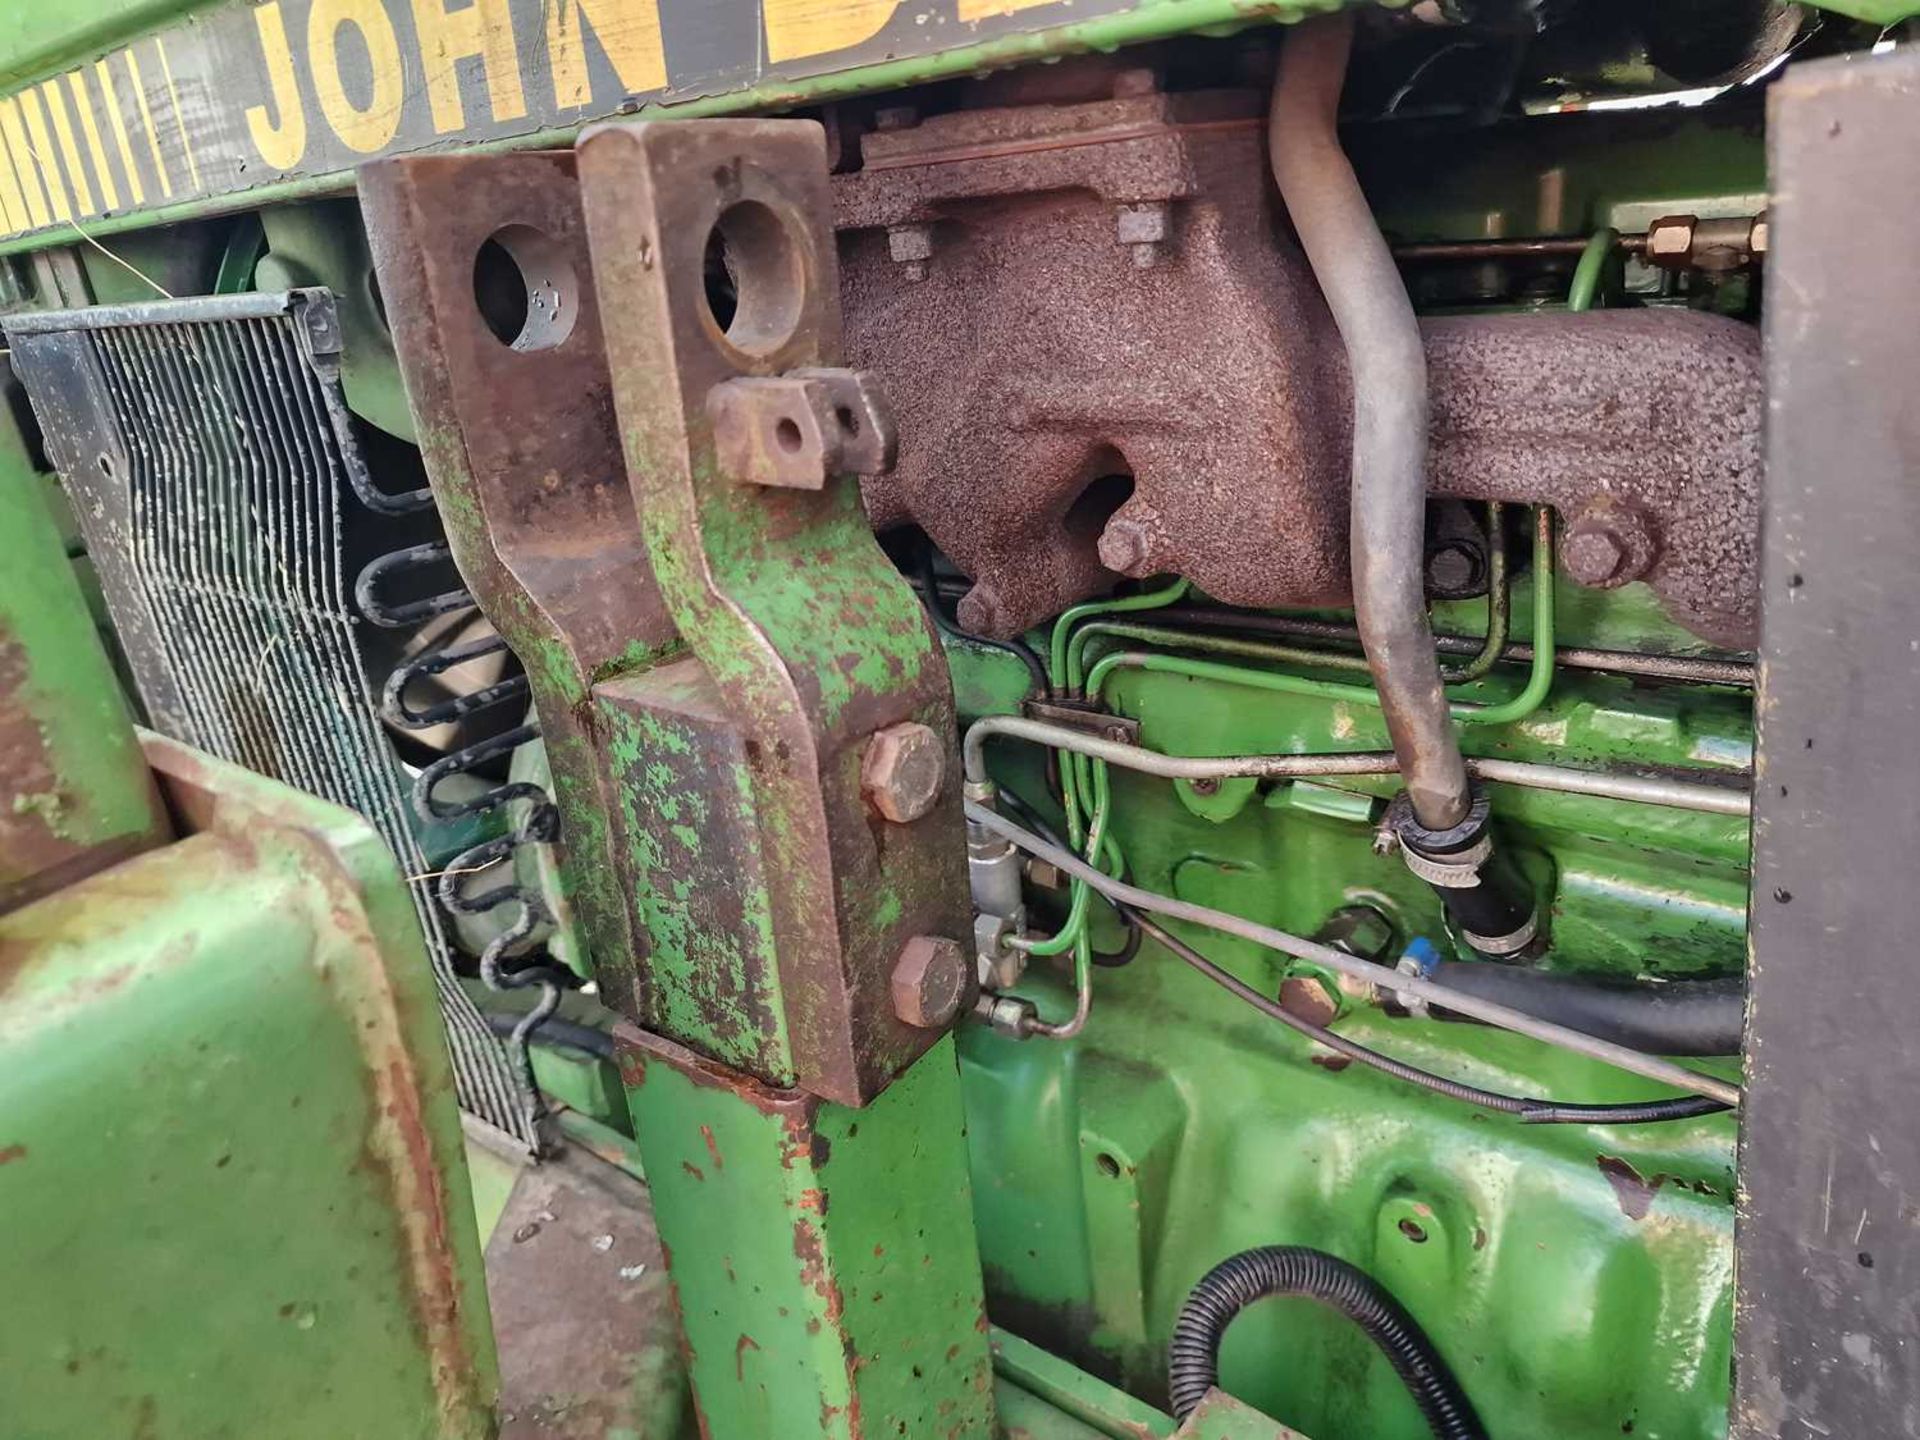 1989 John Deere 2850 4WD Tractor, Loader, 2 Spool Valves, Push Out Hitch (Reg. Docs. Available) - Image 18 of 25